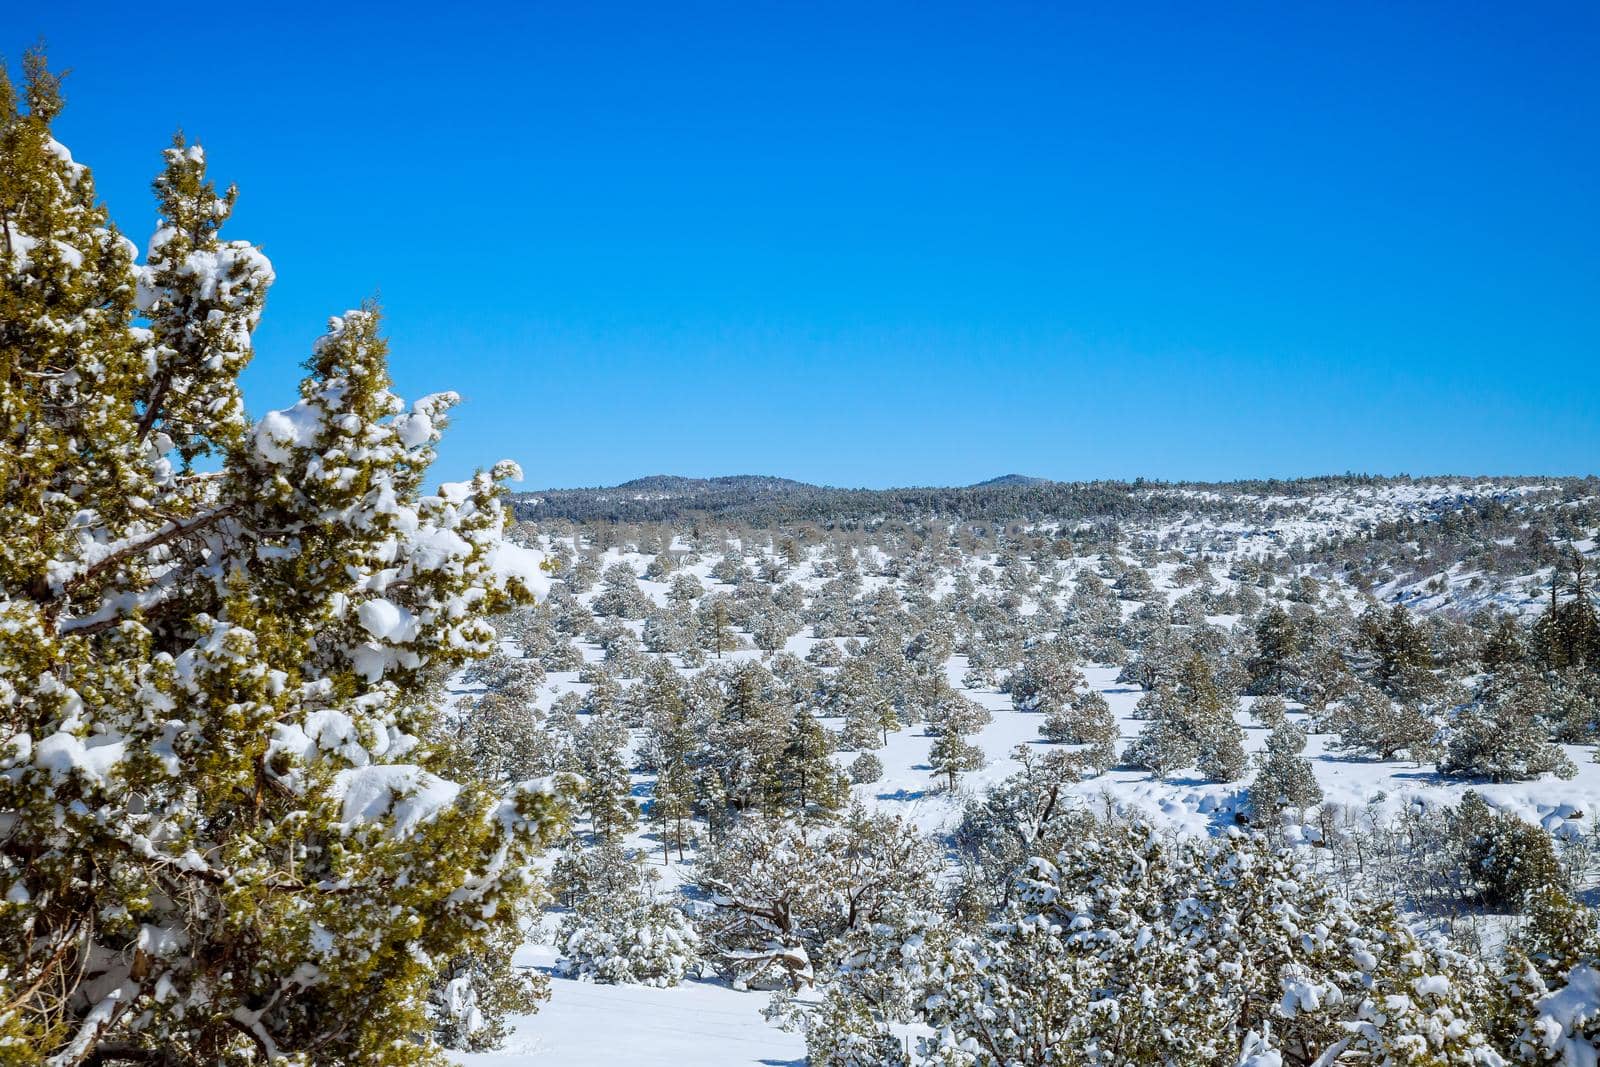 Winter scenery of national park, in the trees snow along Arizona, USA